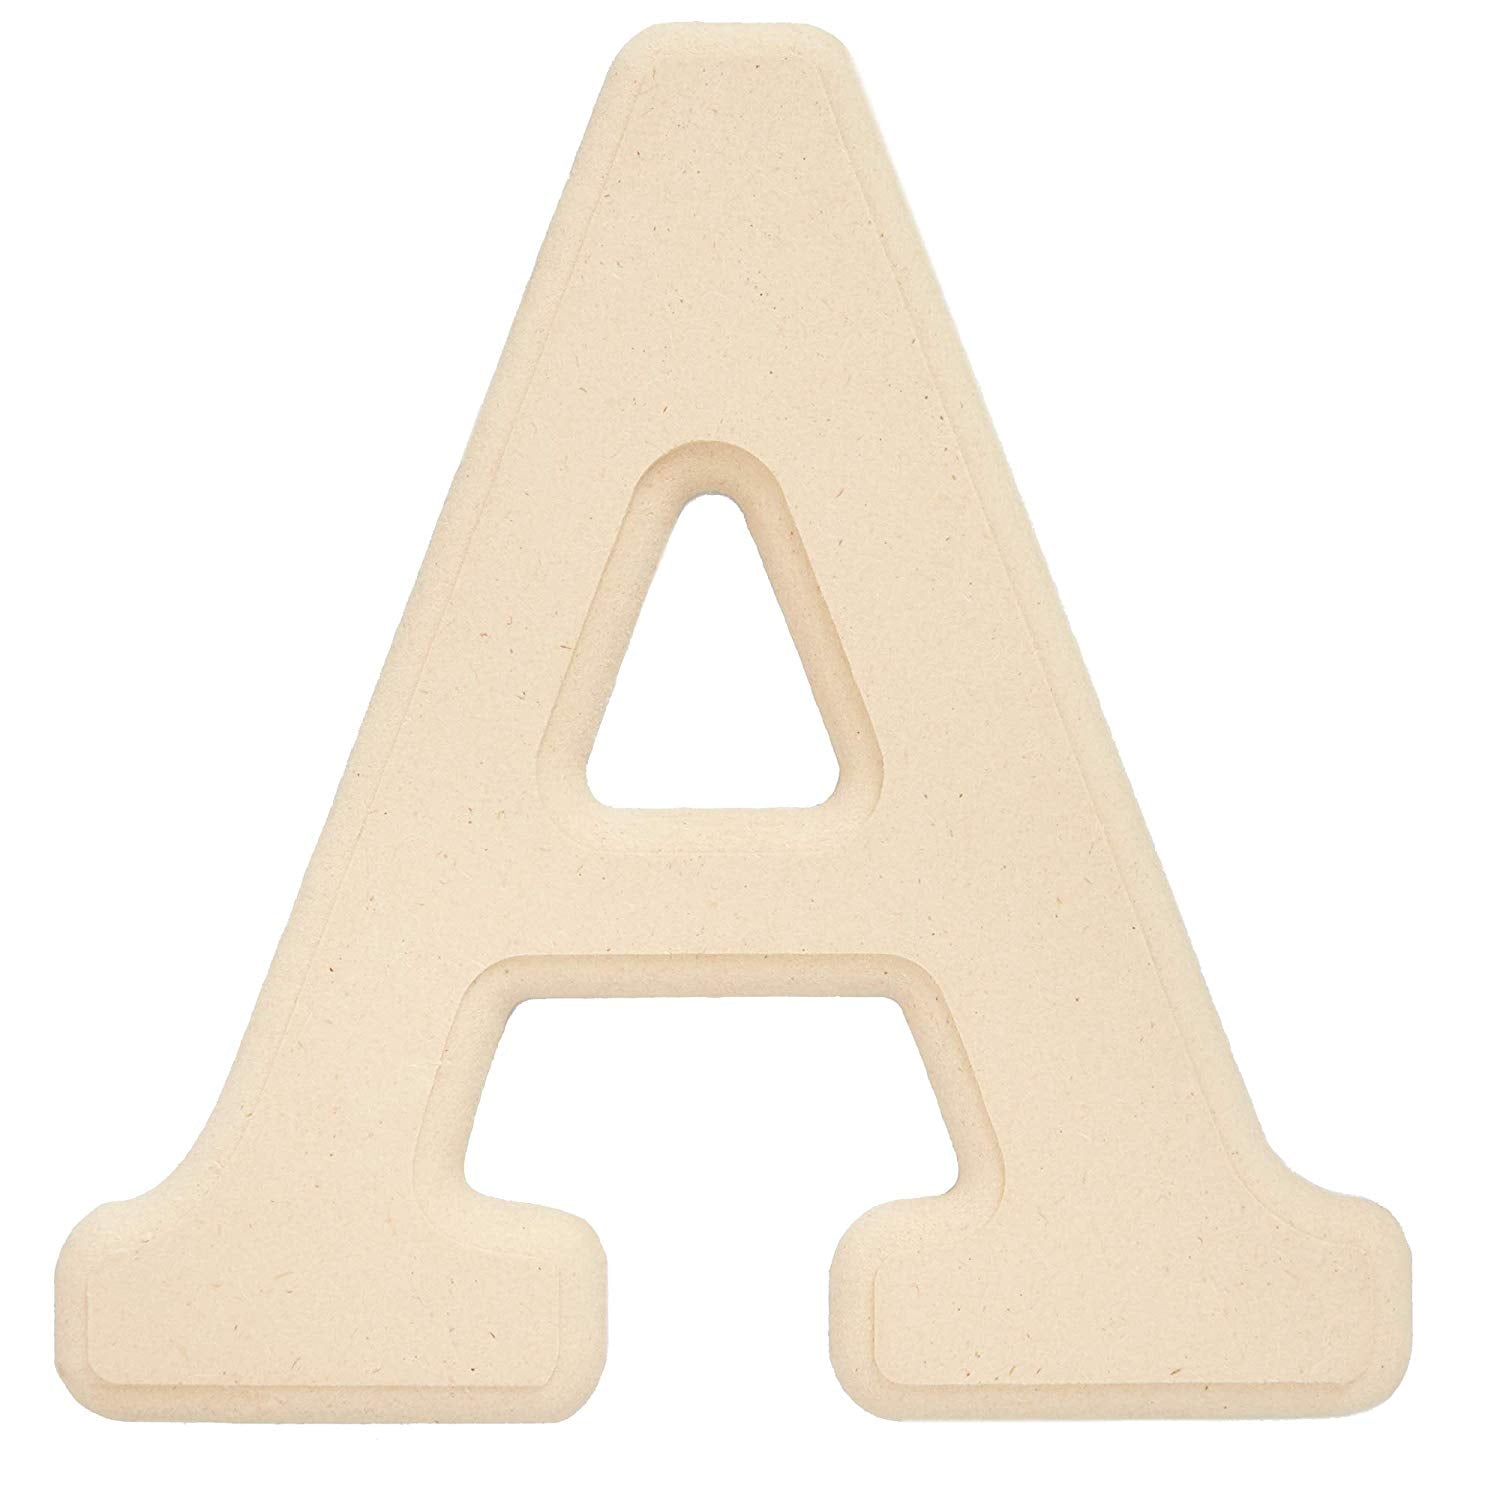 White Wood Letters 4 Inch, Wood Letters for DIY, Party Projects (Z)